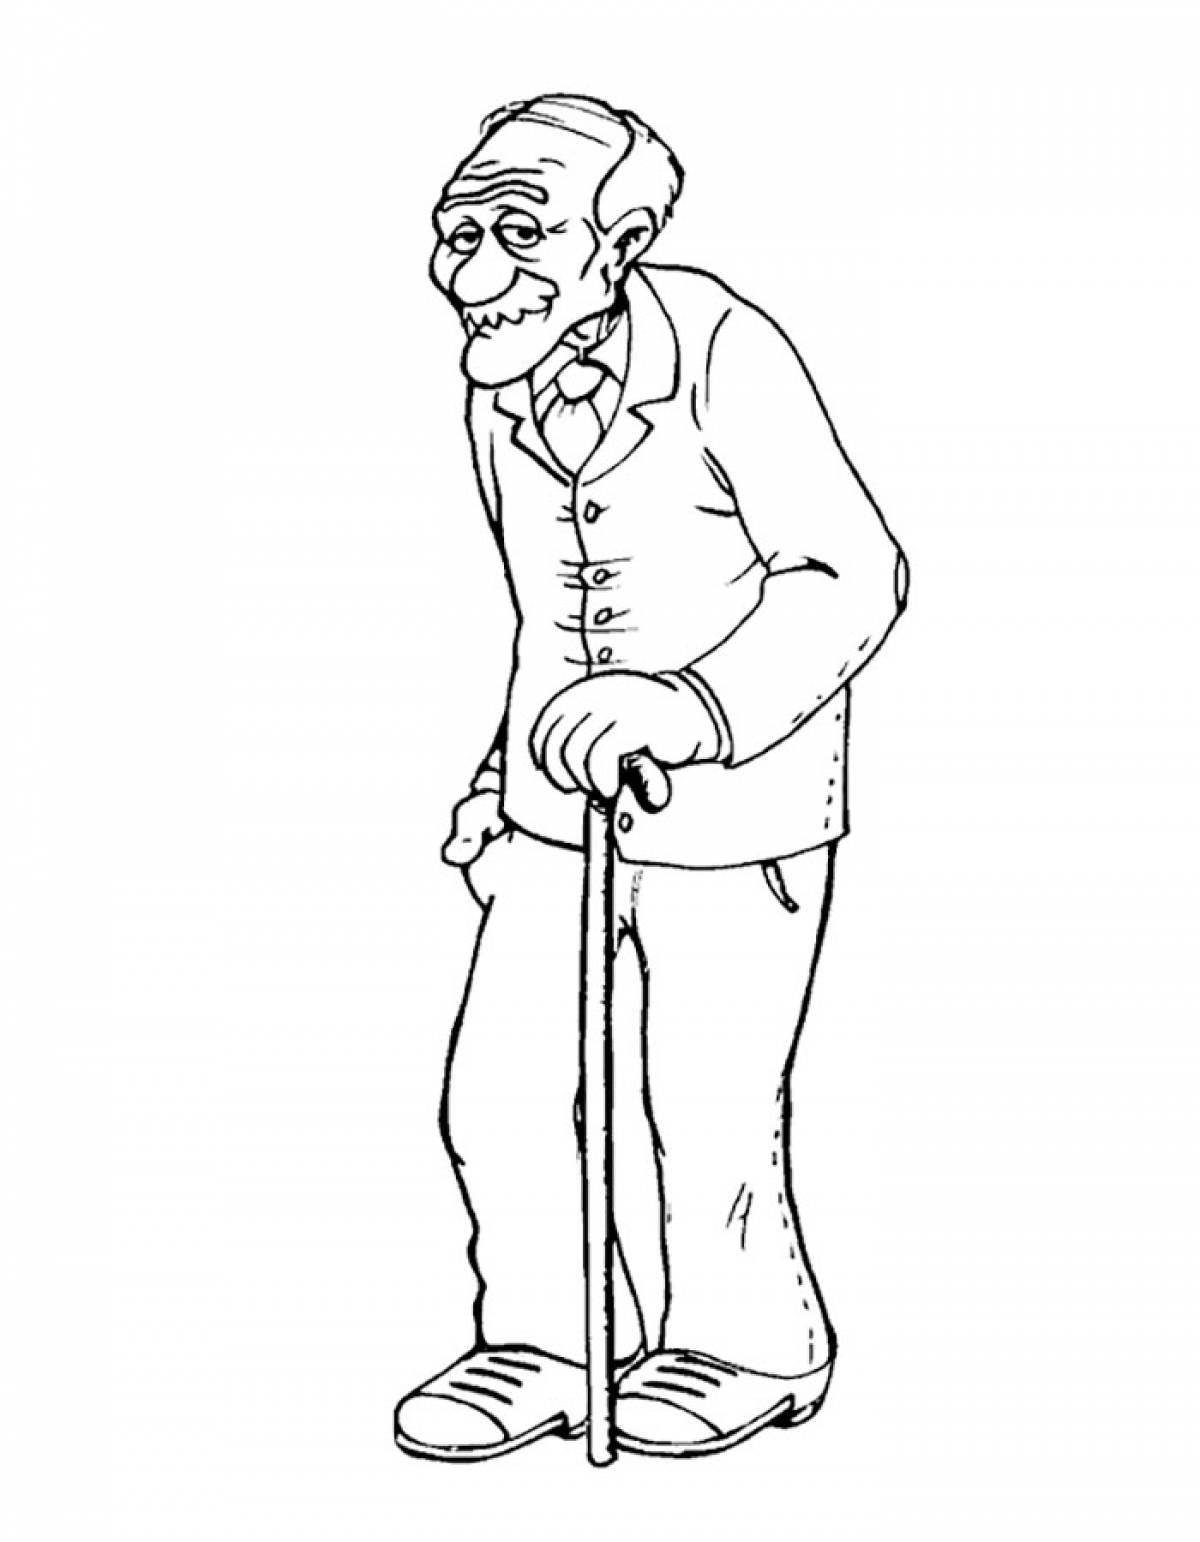 Grandfather coloring page